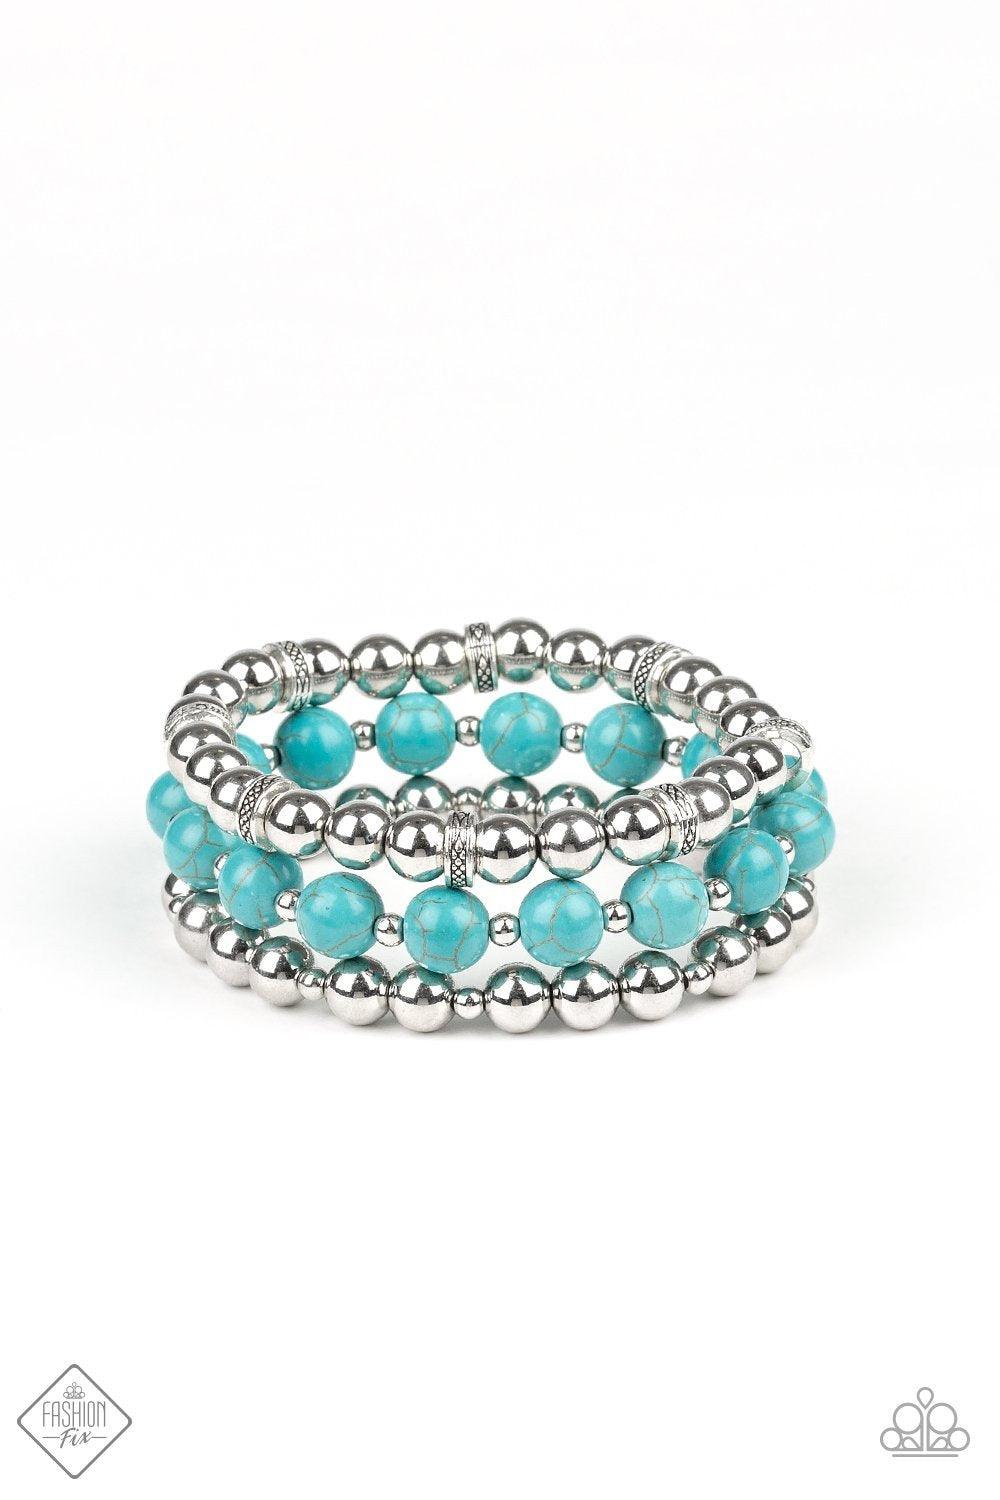 Paparazzi Accessories Sandstone Serendipity - Blue A collection of smooth turquoise stones and shiny silver beads are threaded along stretchy bands, creating earthy layers that adorn the wrist. Sold as one set of three bracelets. Jewelry